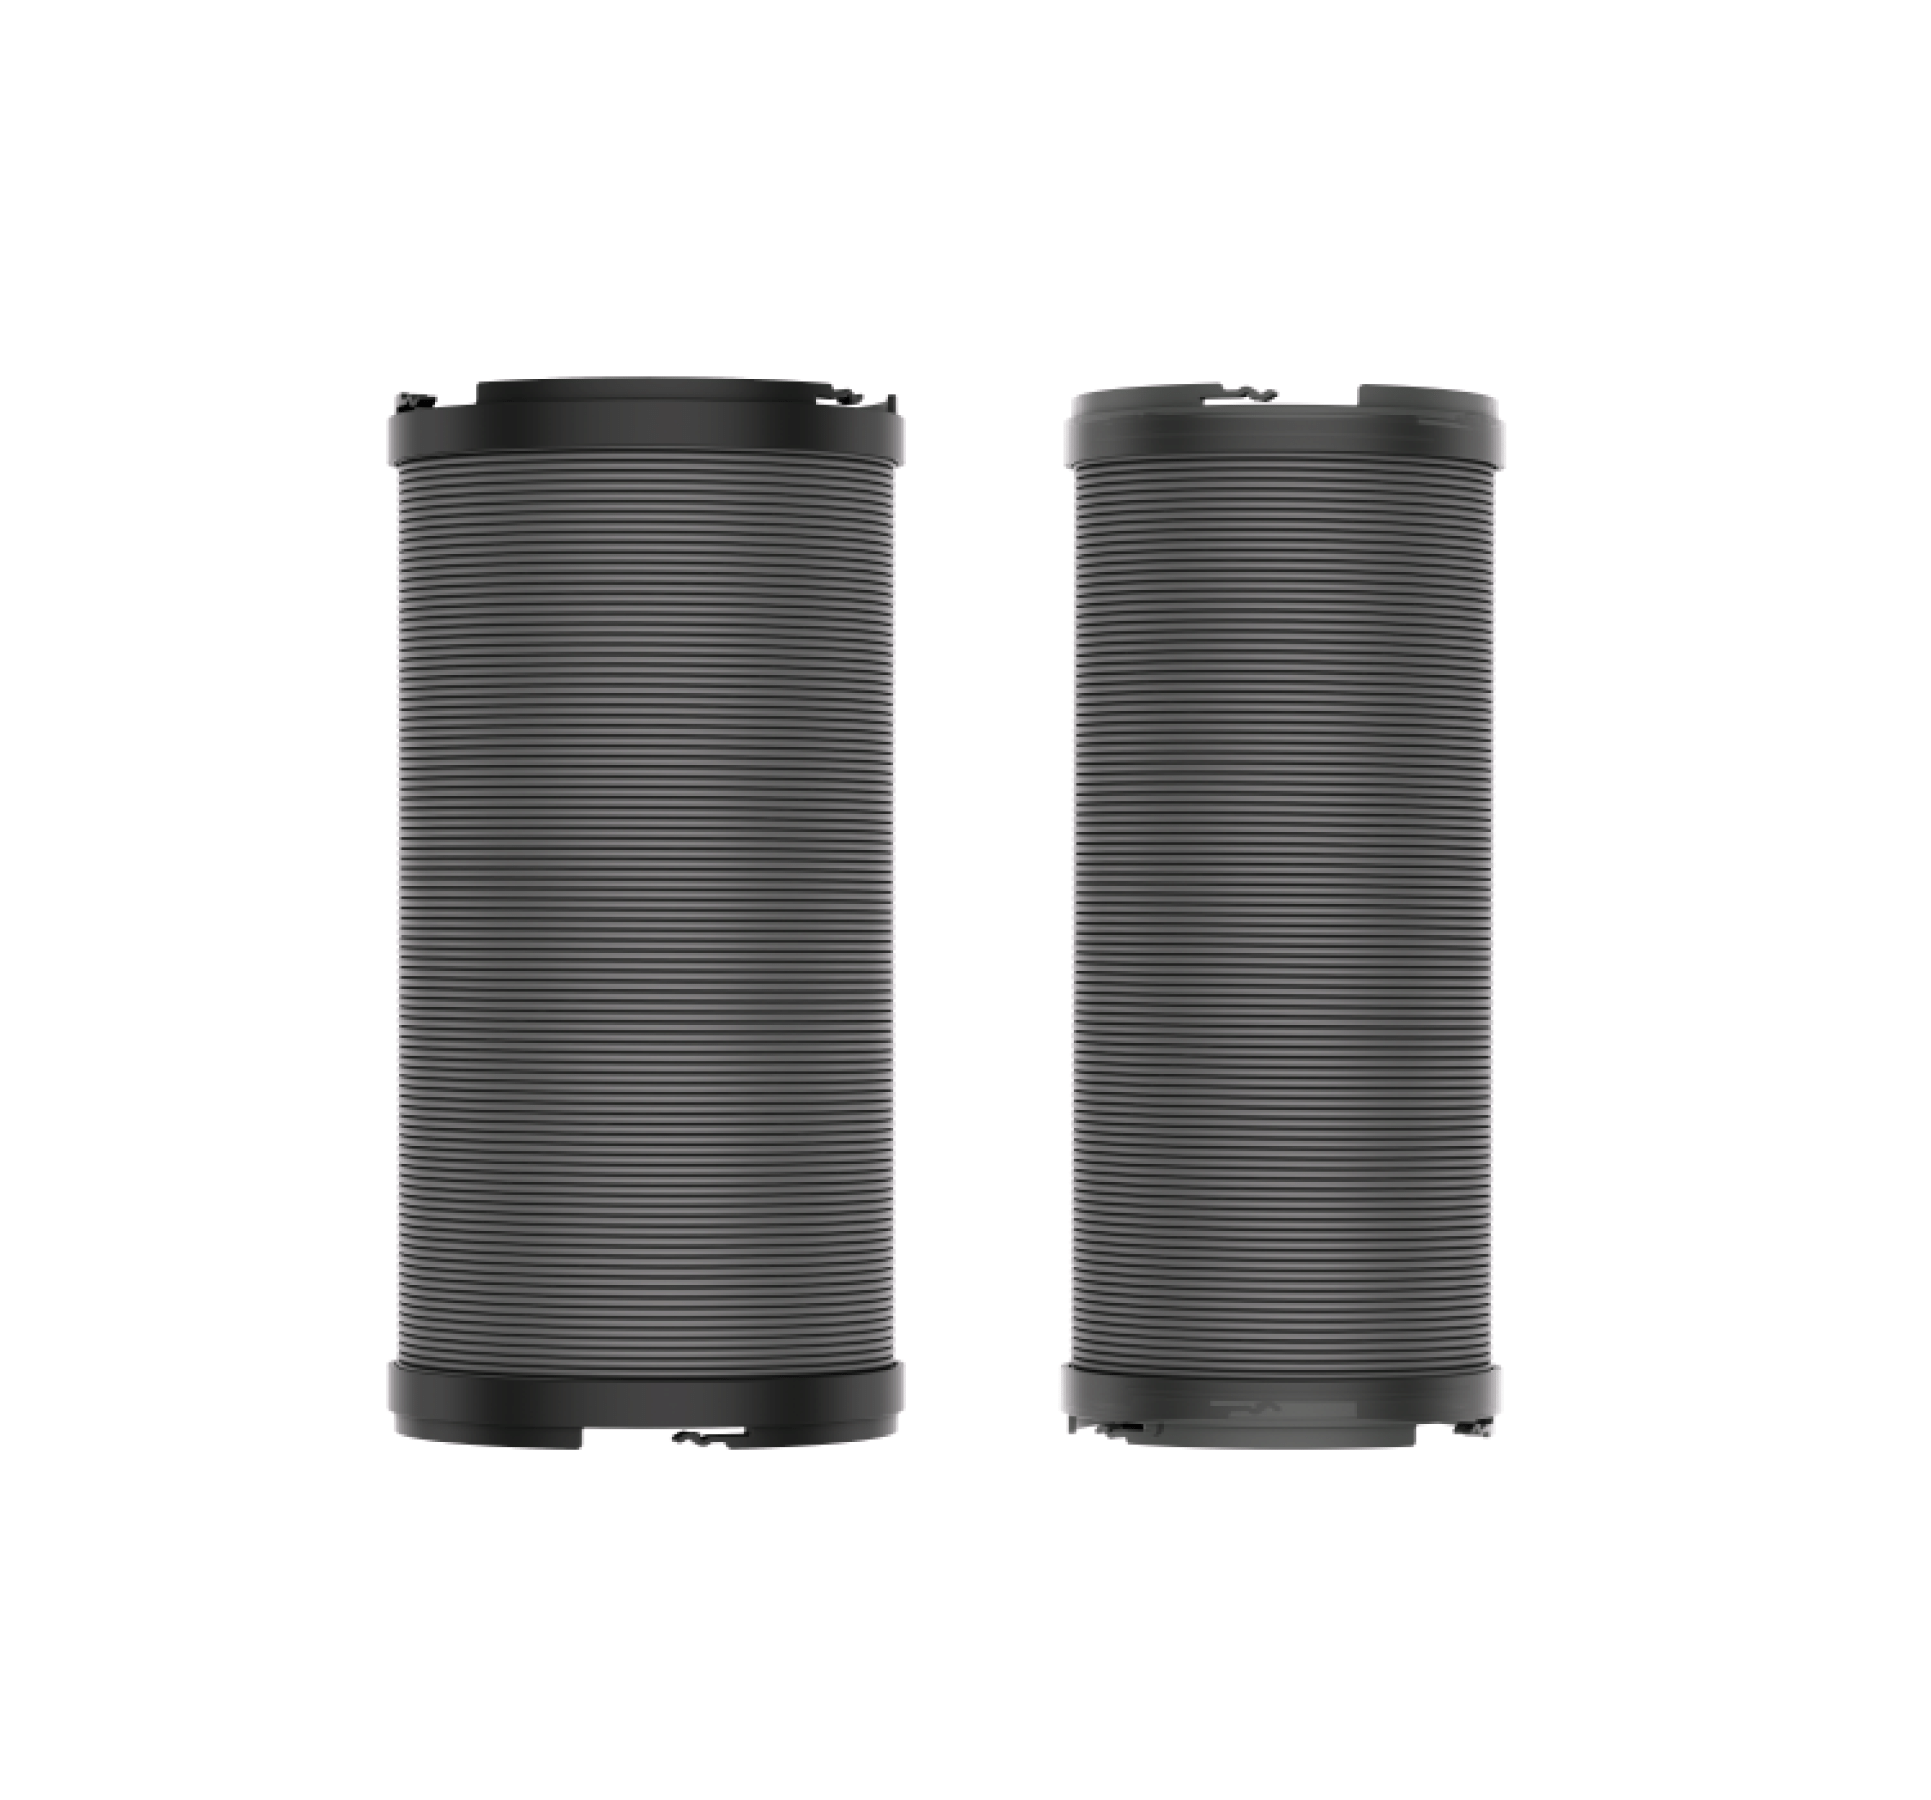 WAVE 2 Exhaust ducts